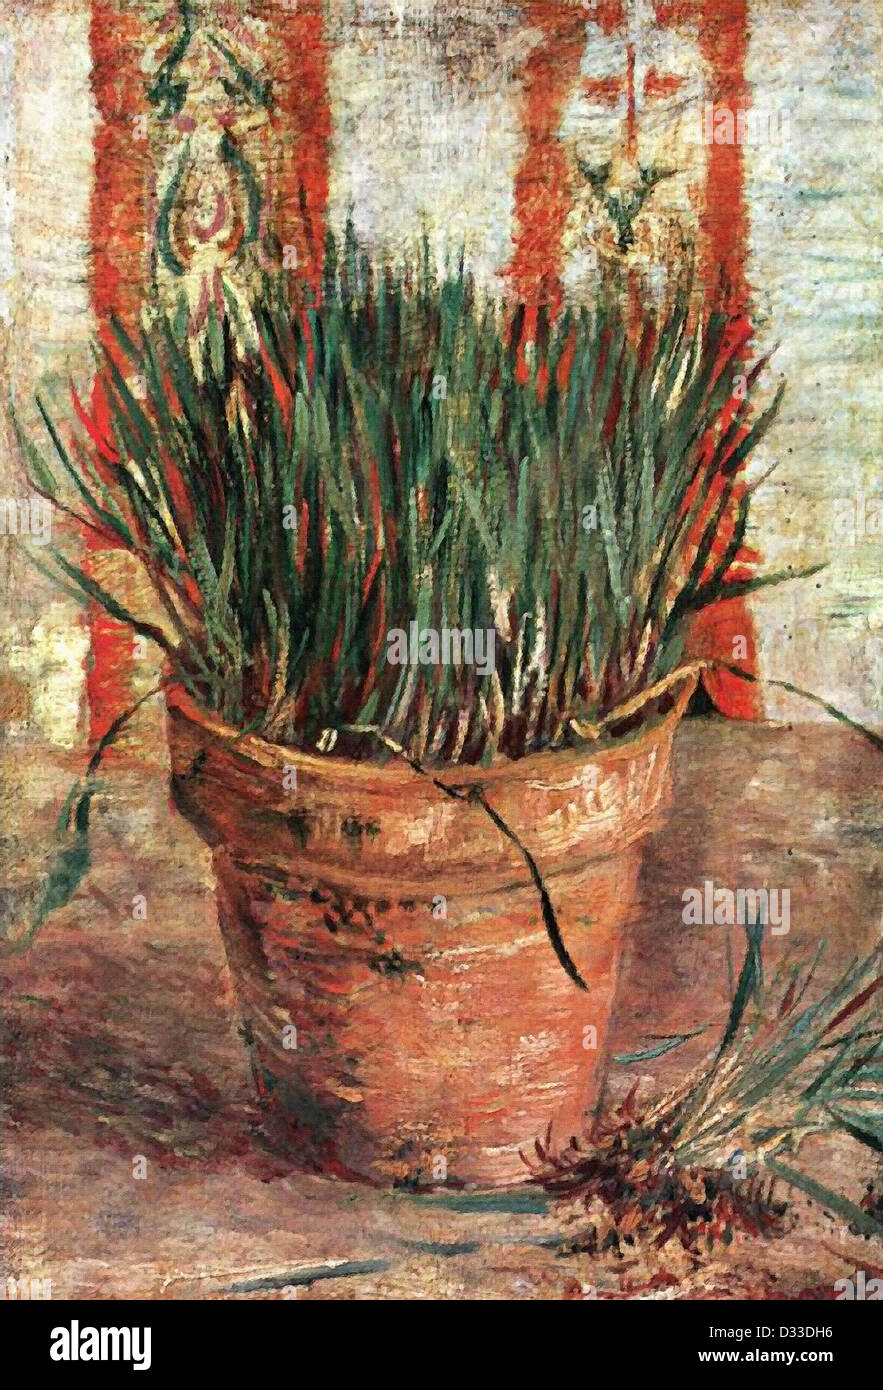 Vincent van Gogh: Flowerpot with Chives. 1887. Oil on canvas. Van Gogh Museum, Amsterdam, Netherlands. Place of Creation: Paris, Stock Photo